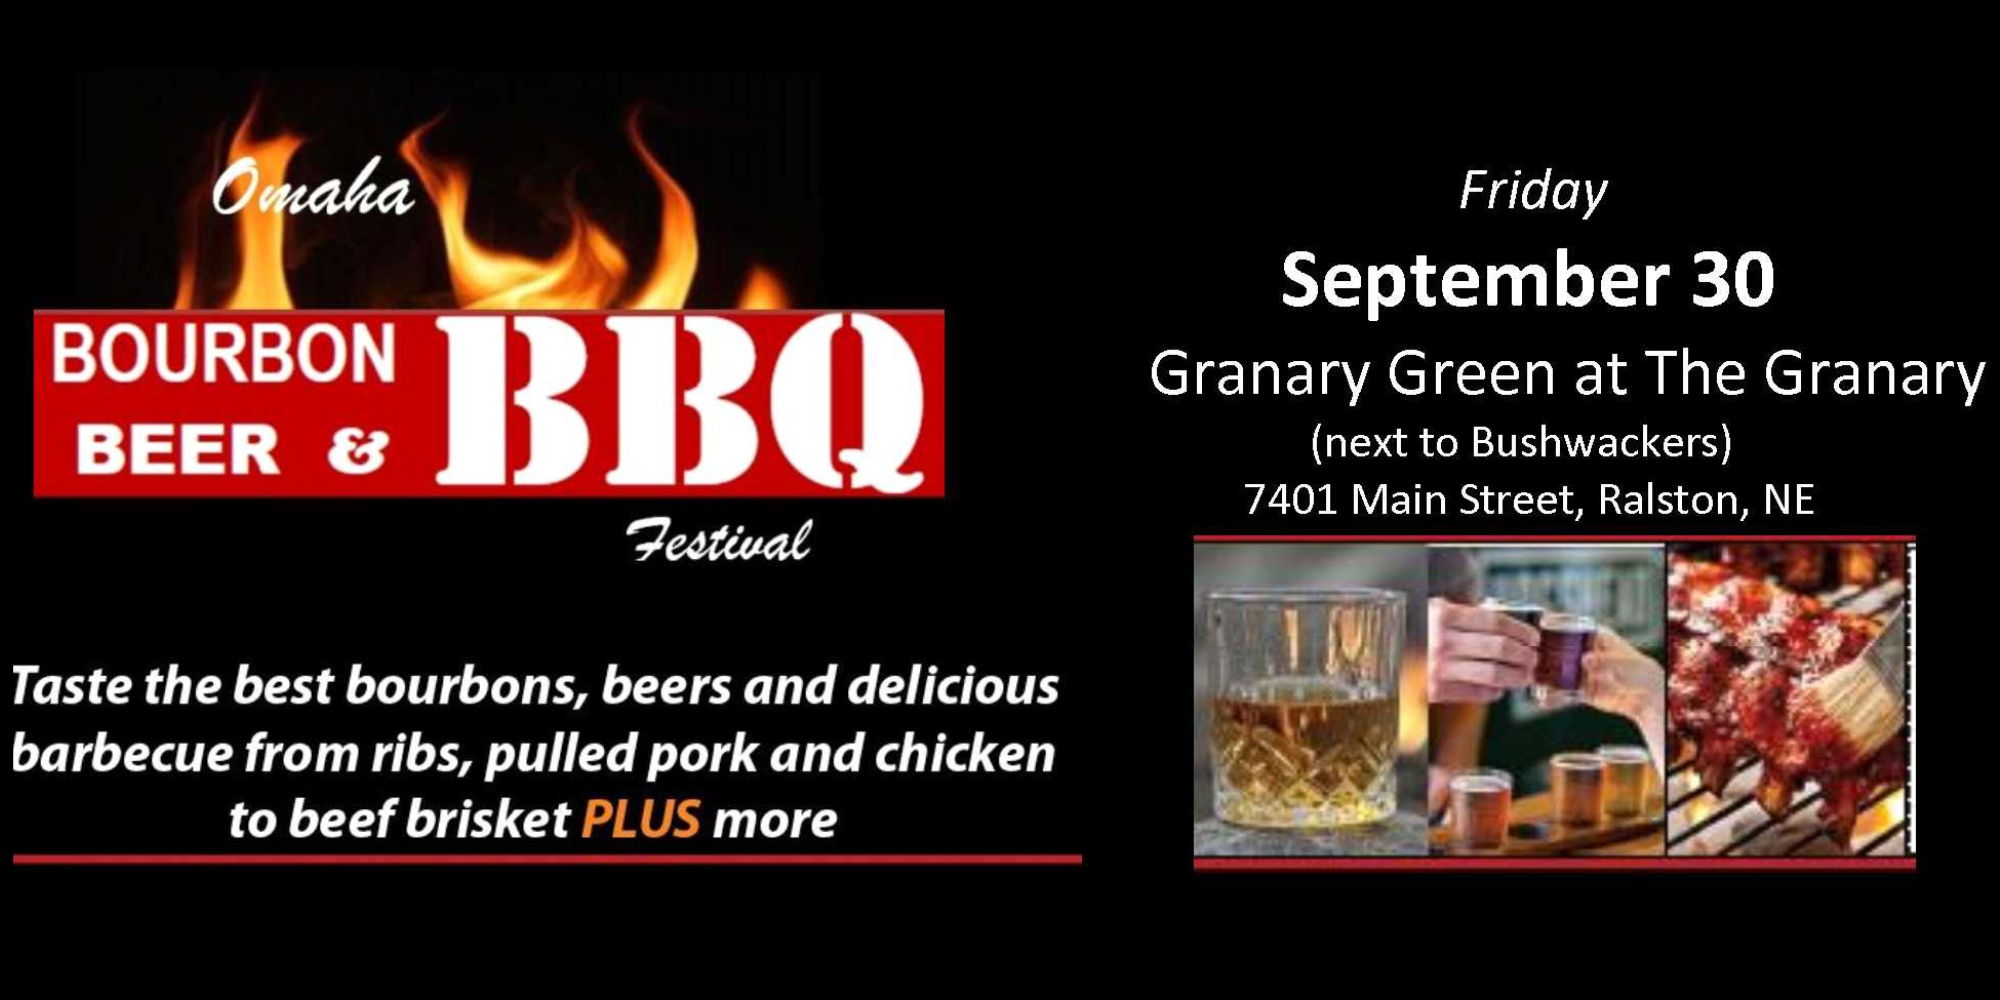 Omaha Bourbon, Beer and BBQ Festival promotional image